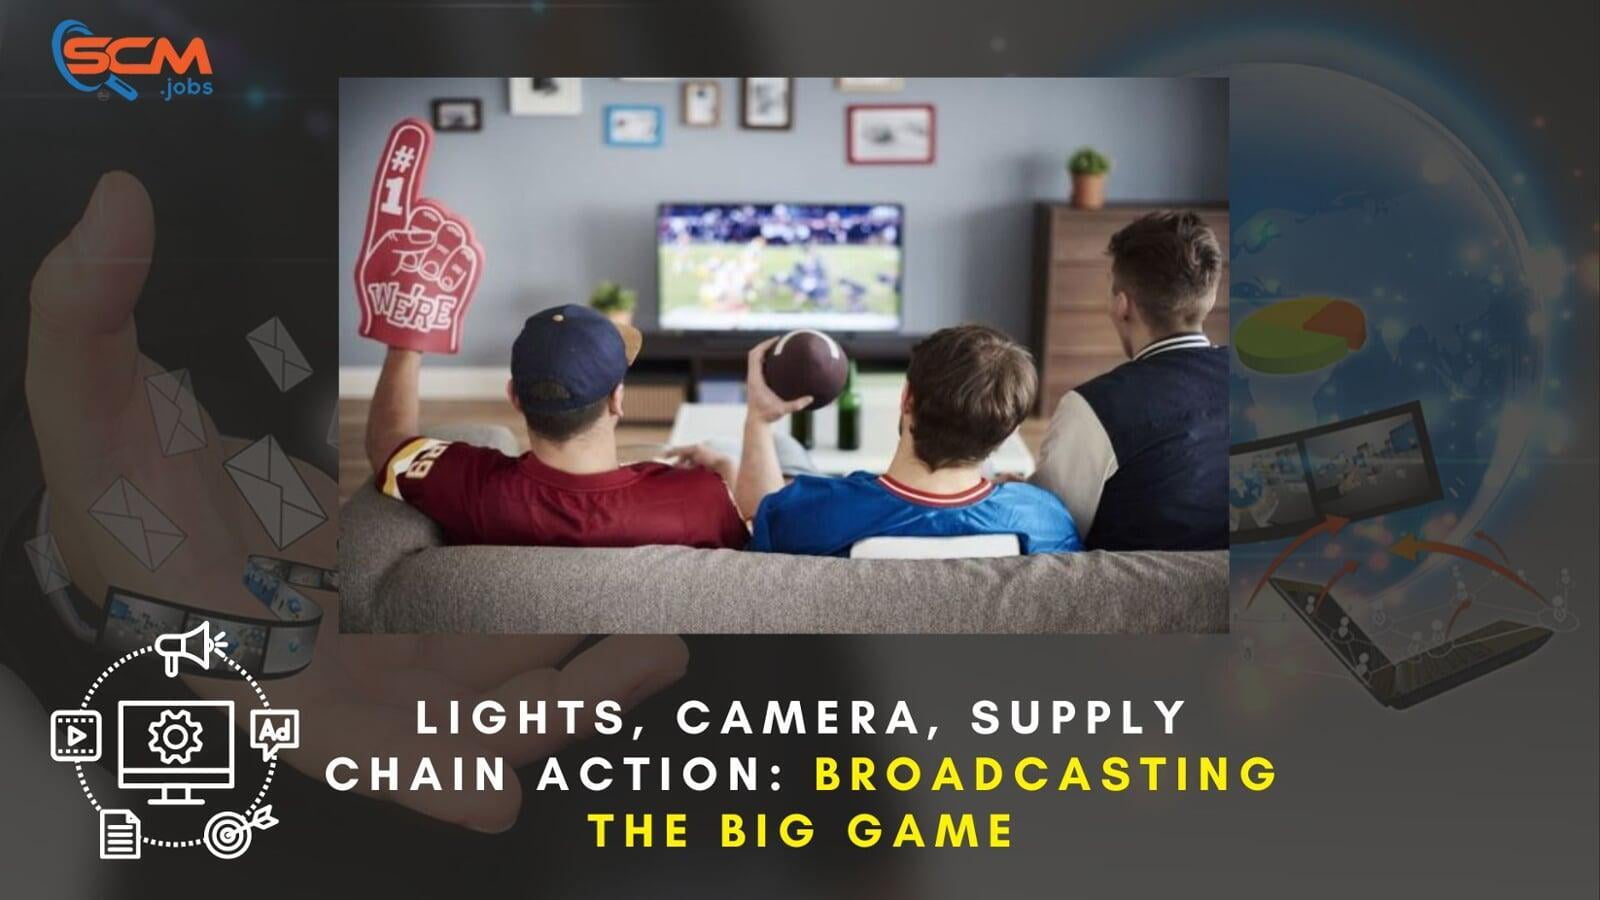 Lights, Camera, Supply Chain Action: Broadcasting the Big Game